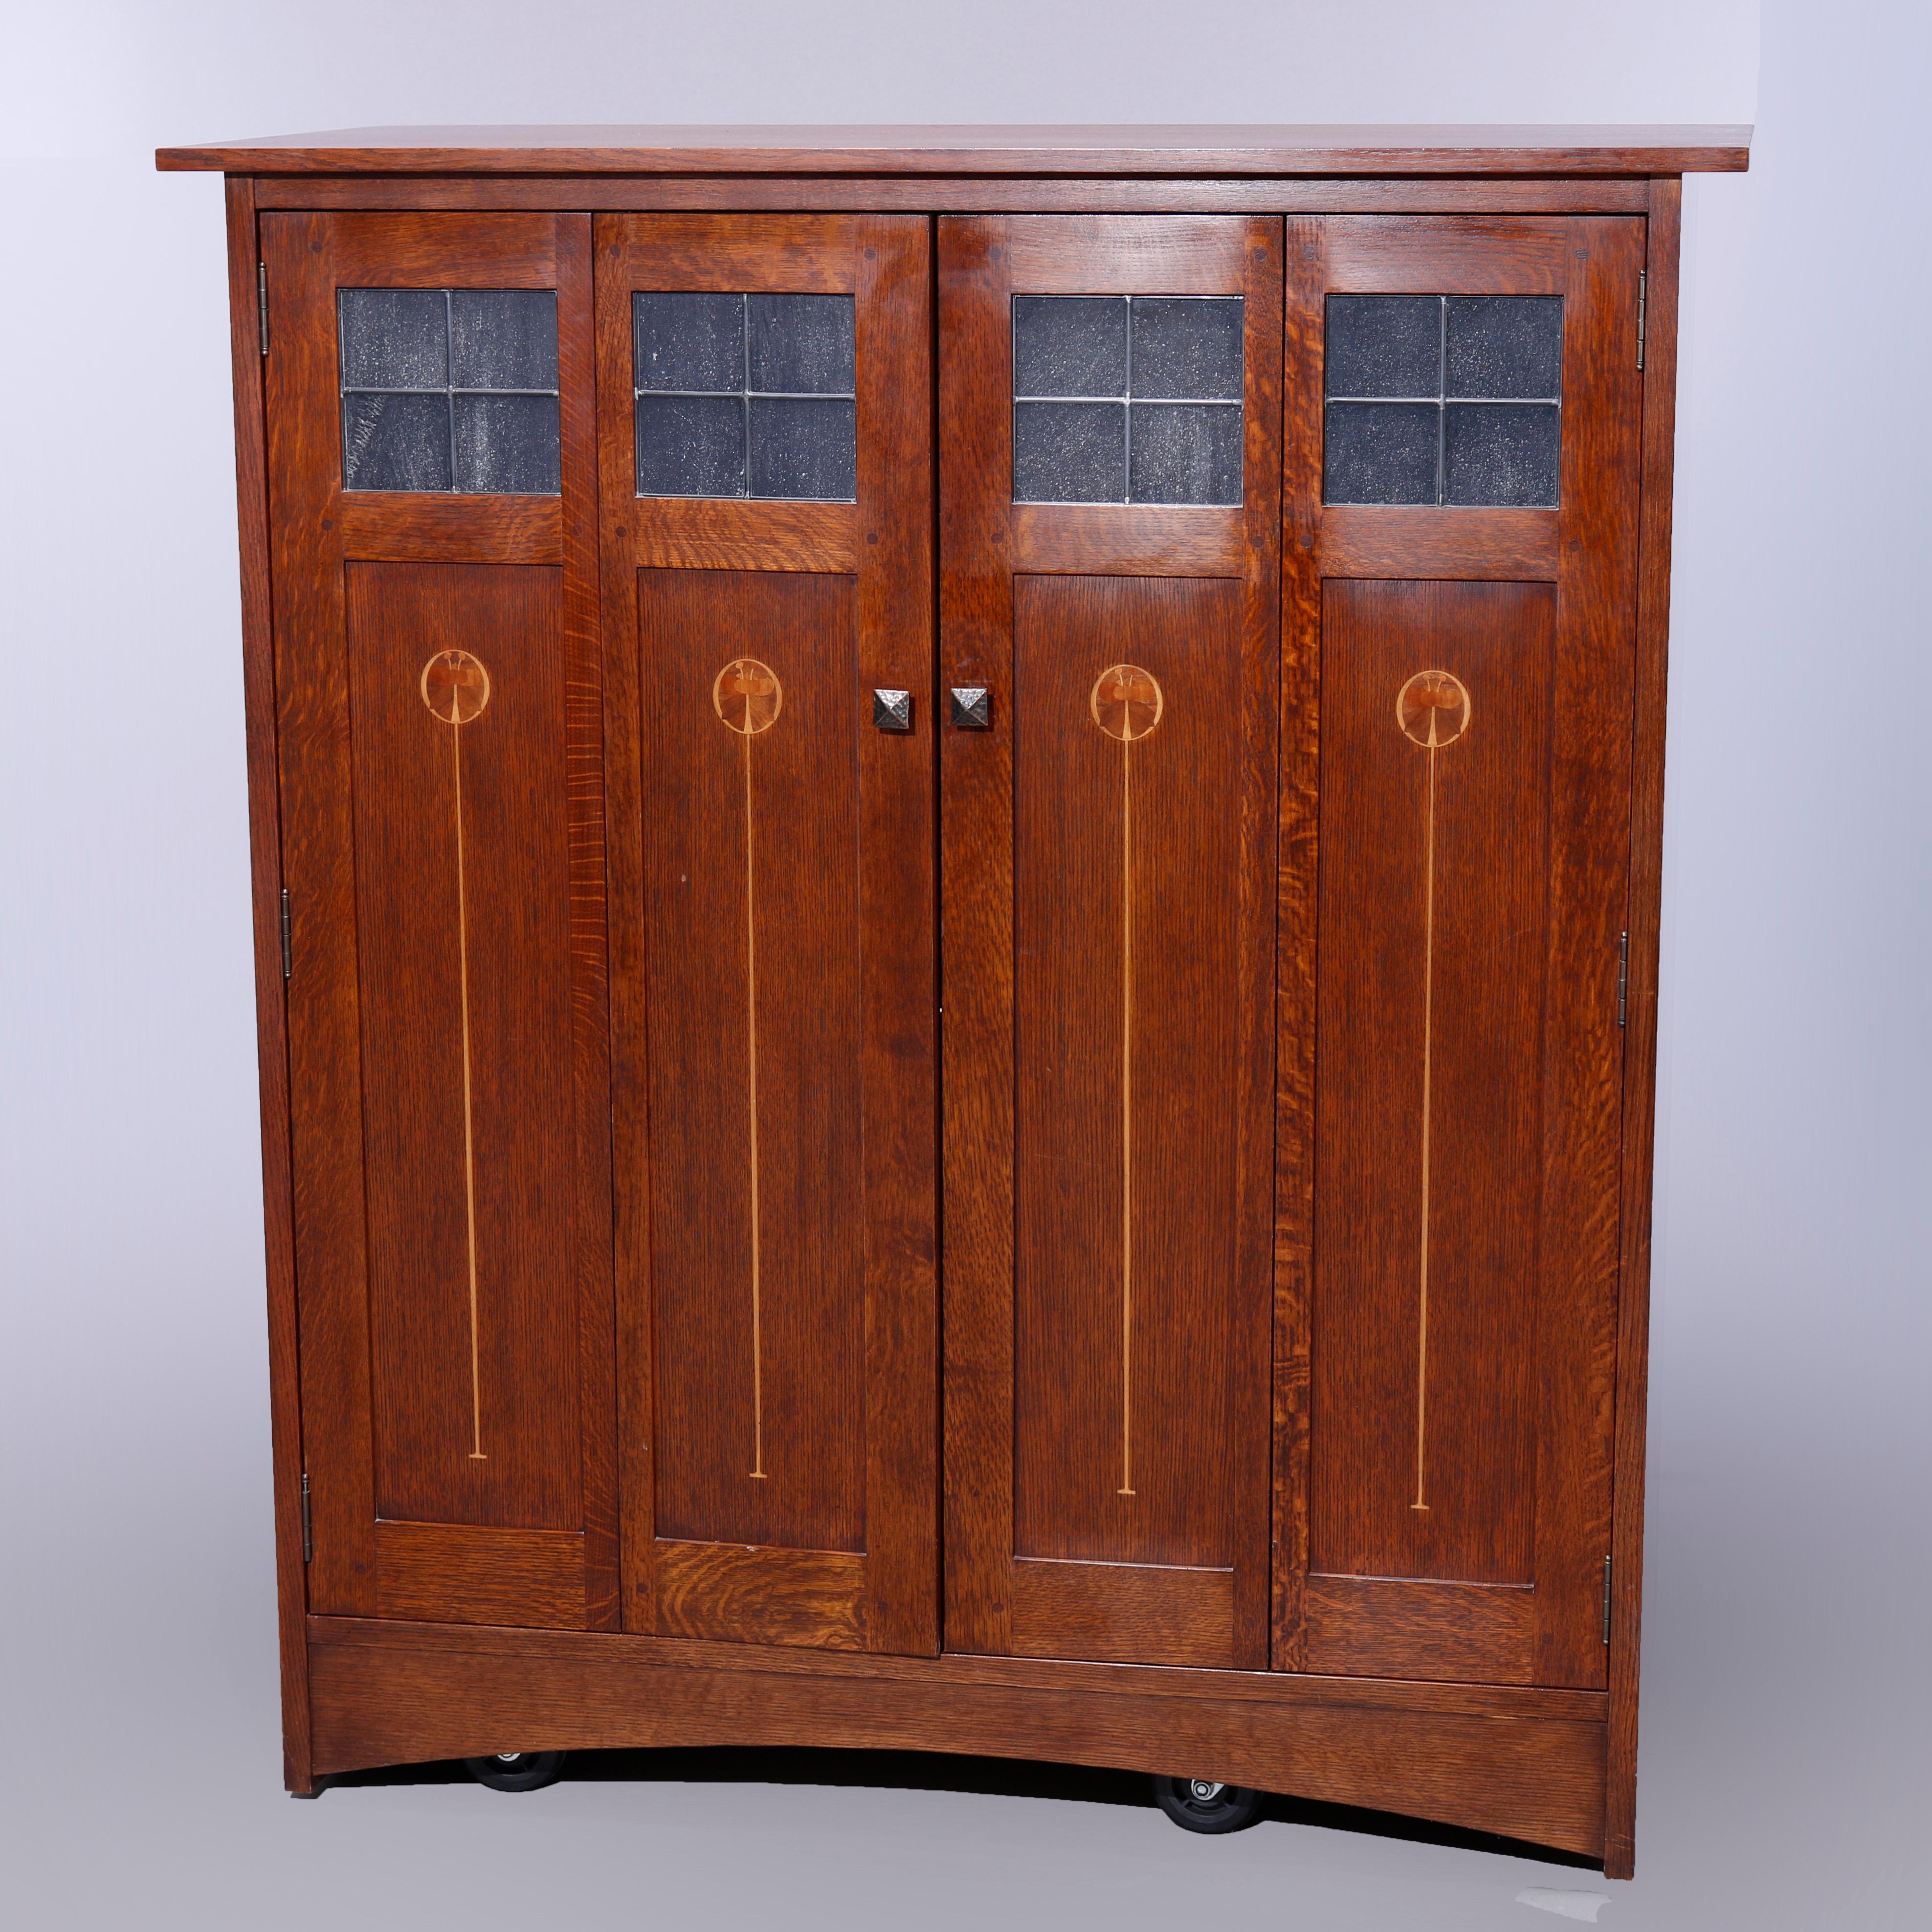 An Arts and Crafts Mission Oak entertainment center by Stickley offers Harvey Ellis Design with double doors having stylized marquetry floral inlay20th century

Measures - 57''H x 51''W x 25.25''D.